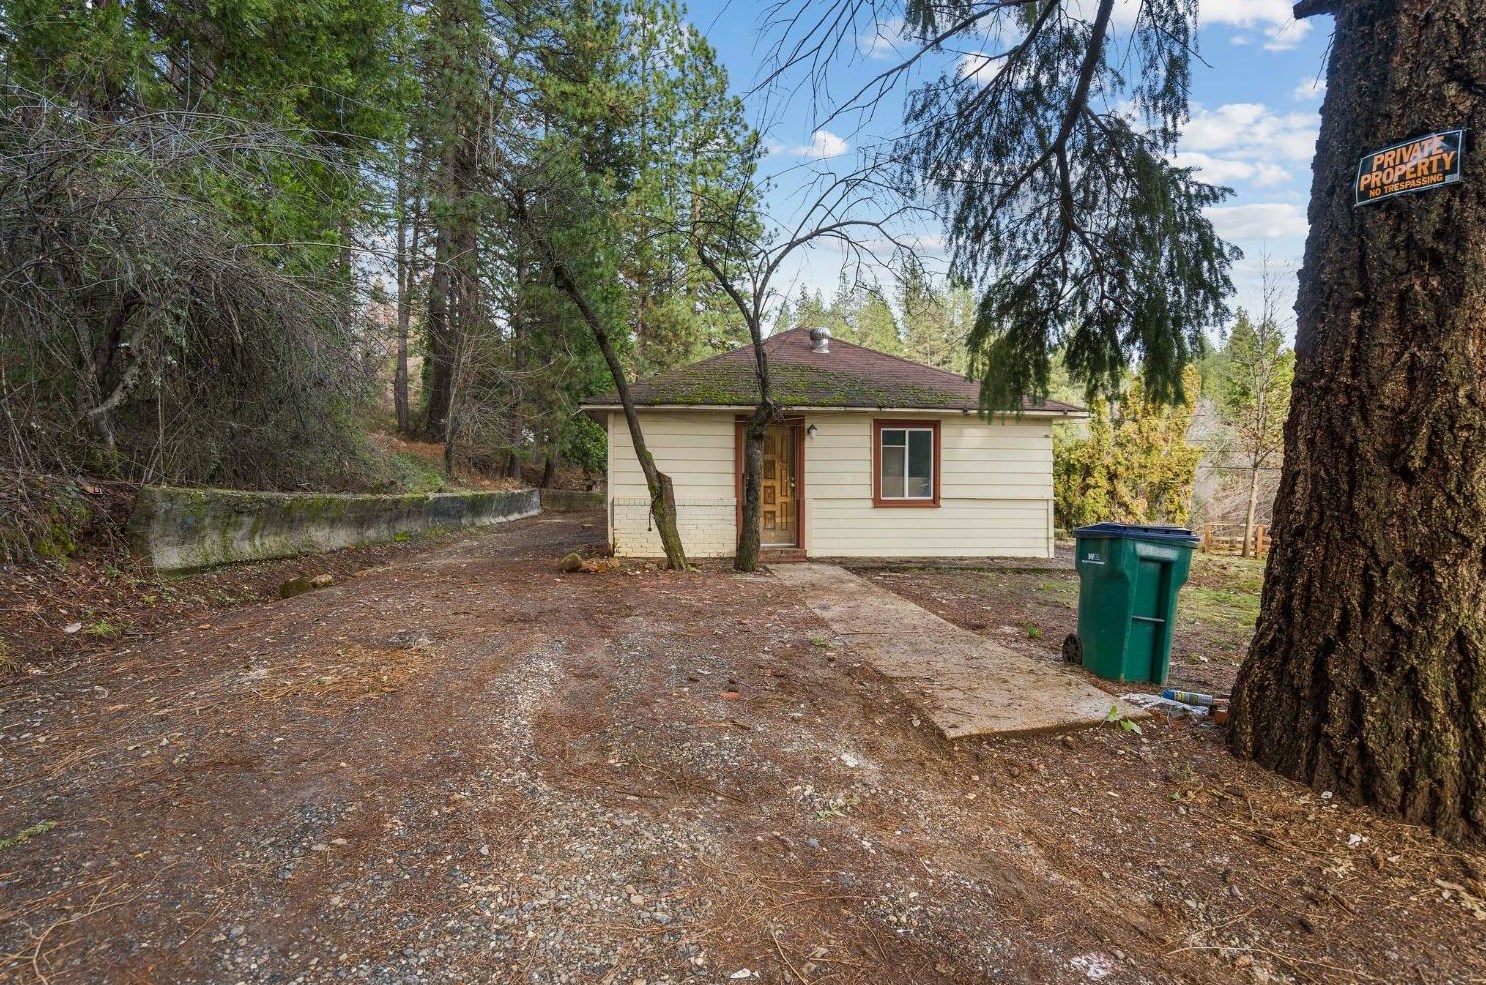 287 W Olympia Dr, Grass Valley, CA 95945